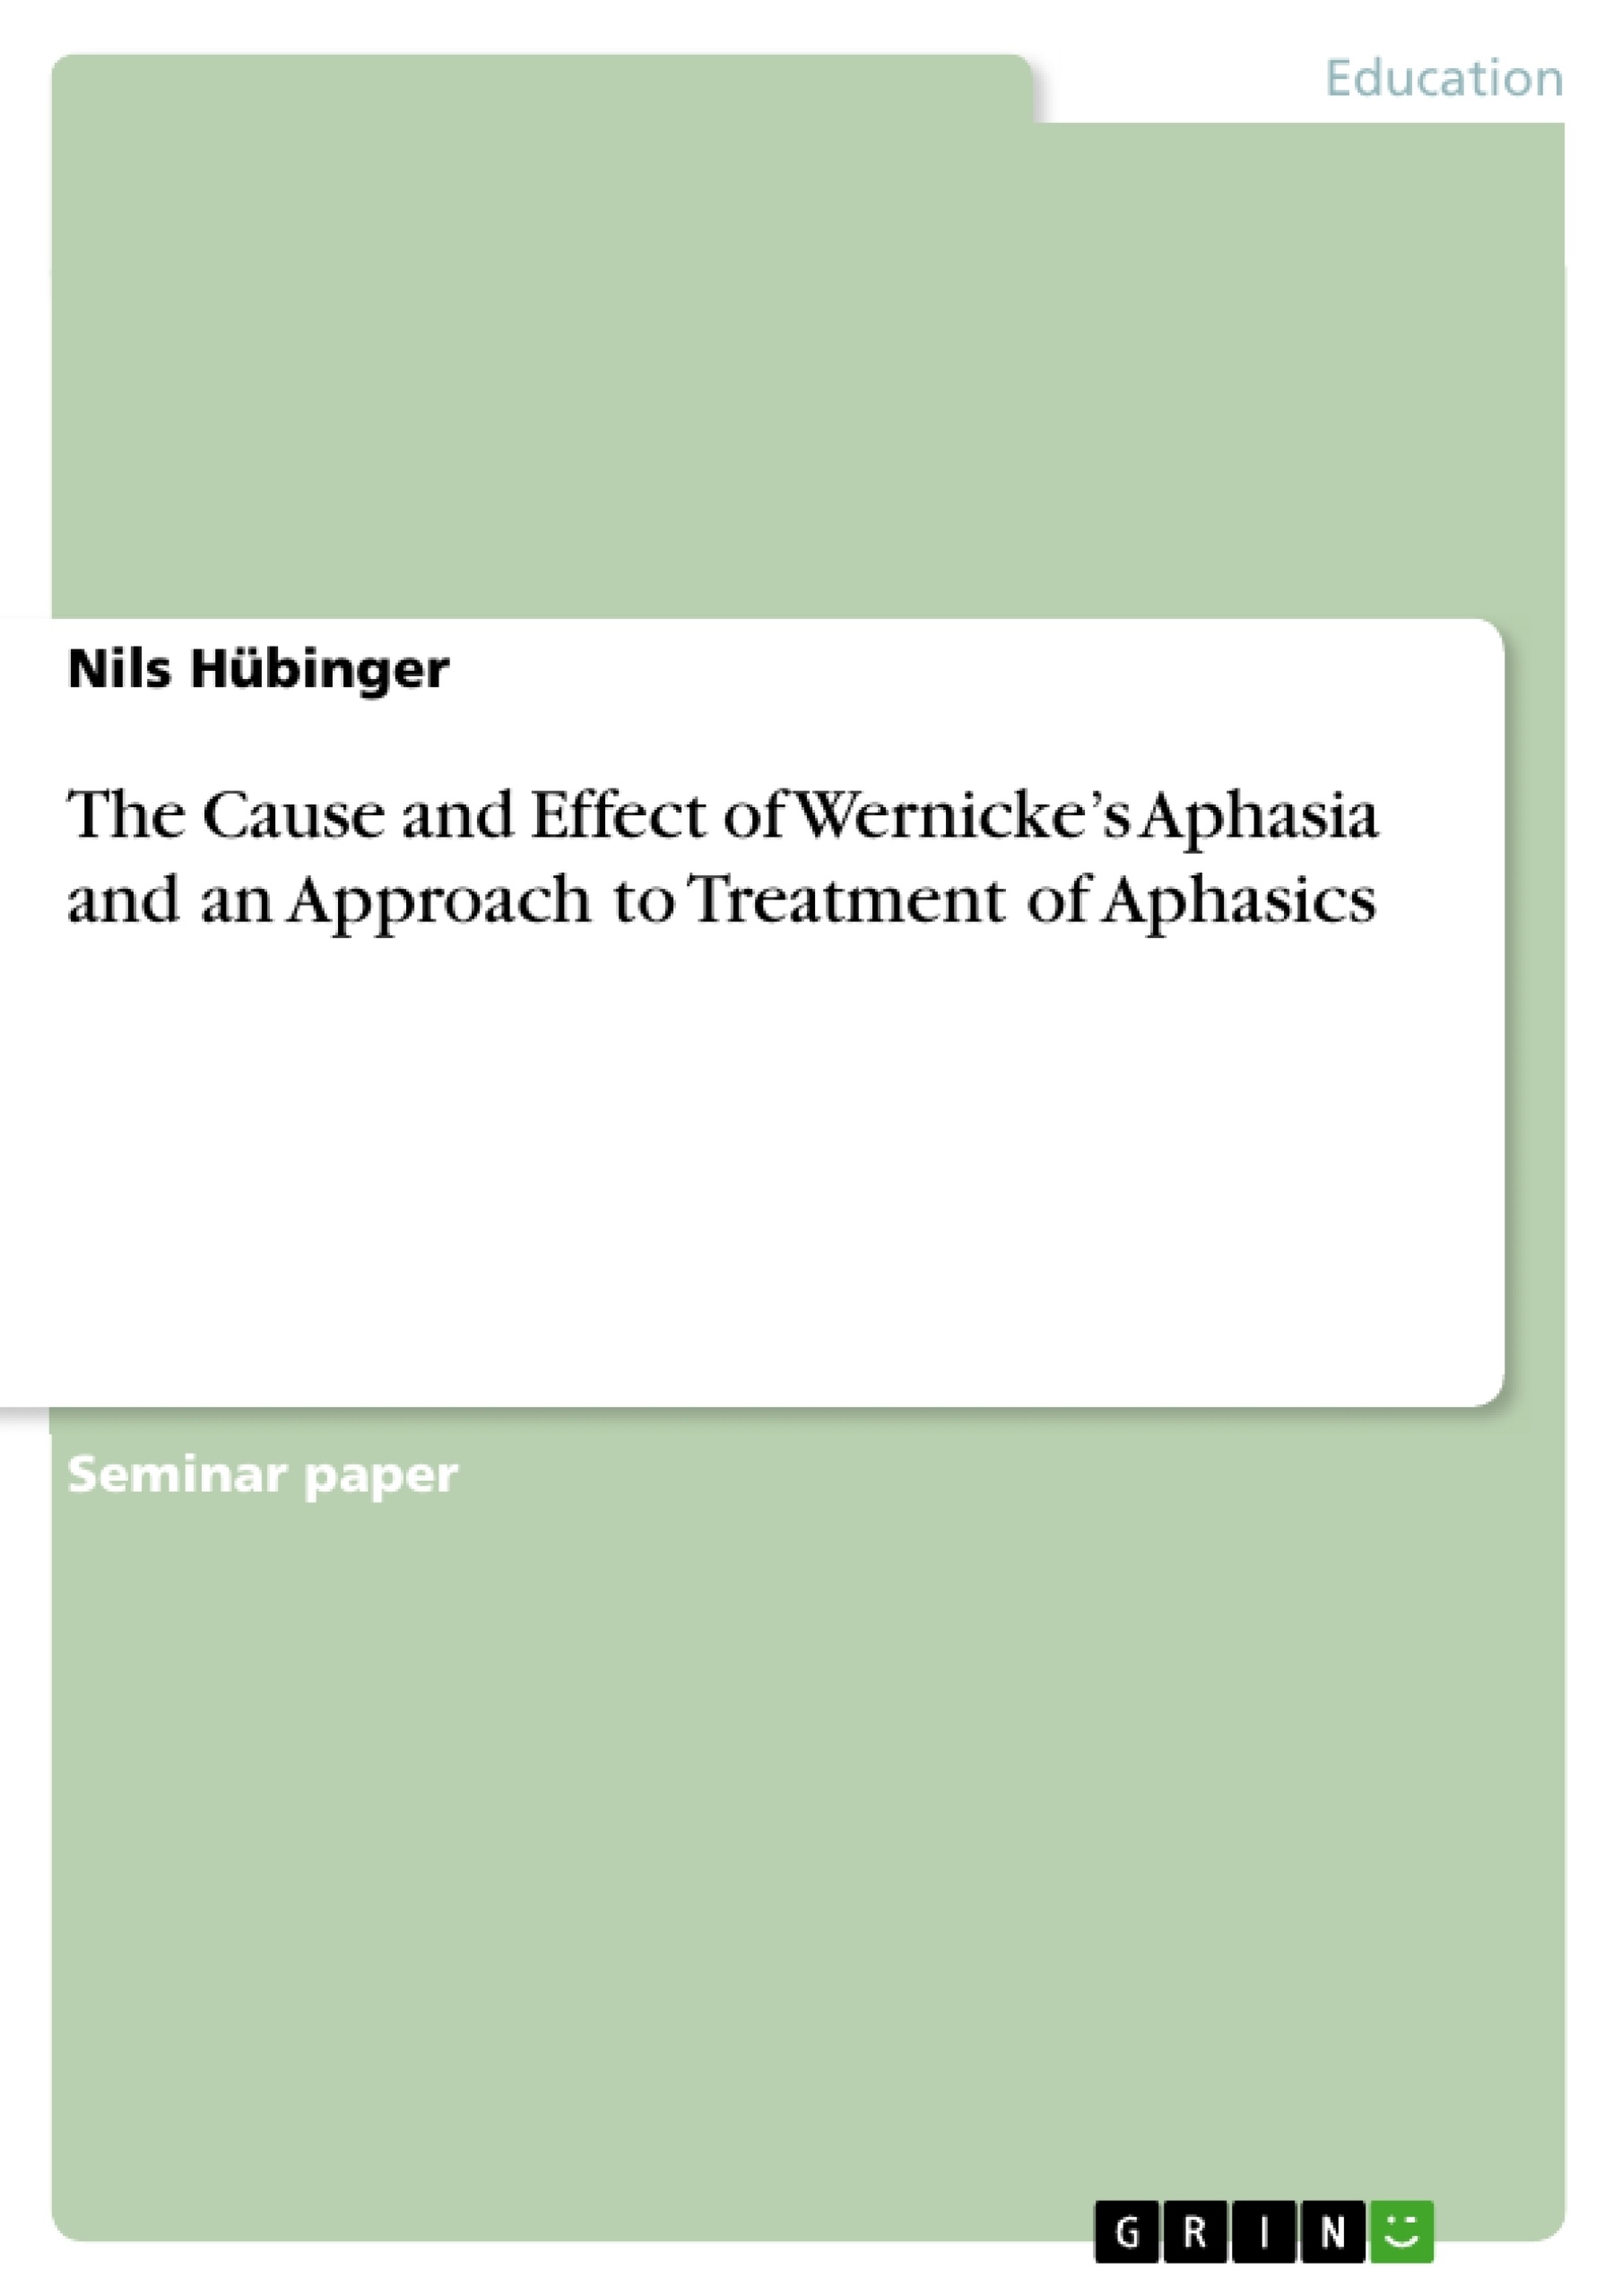 Title: The Cause and Effect of Wernicke’s Aphasia and an Approach to Treatment of Aphasics